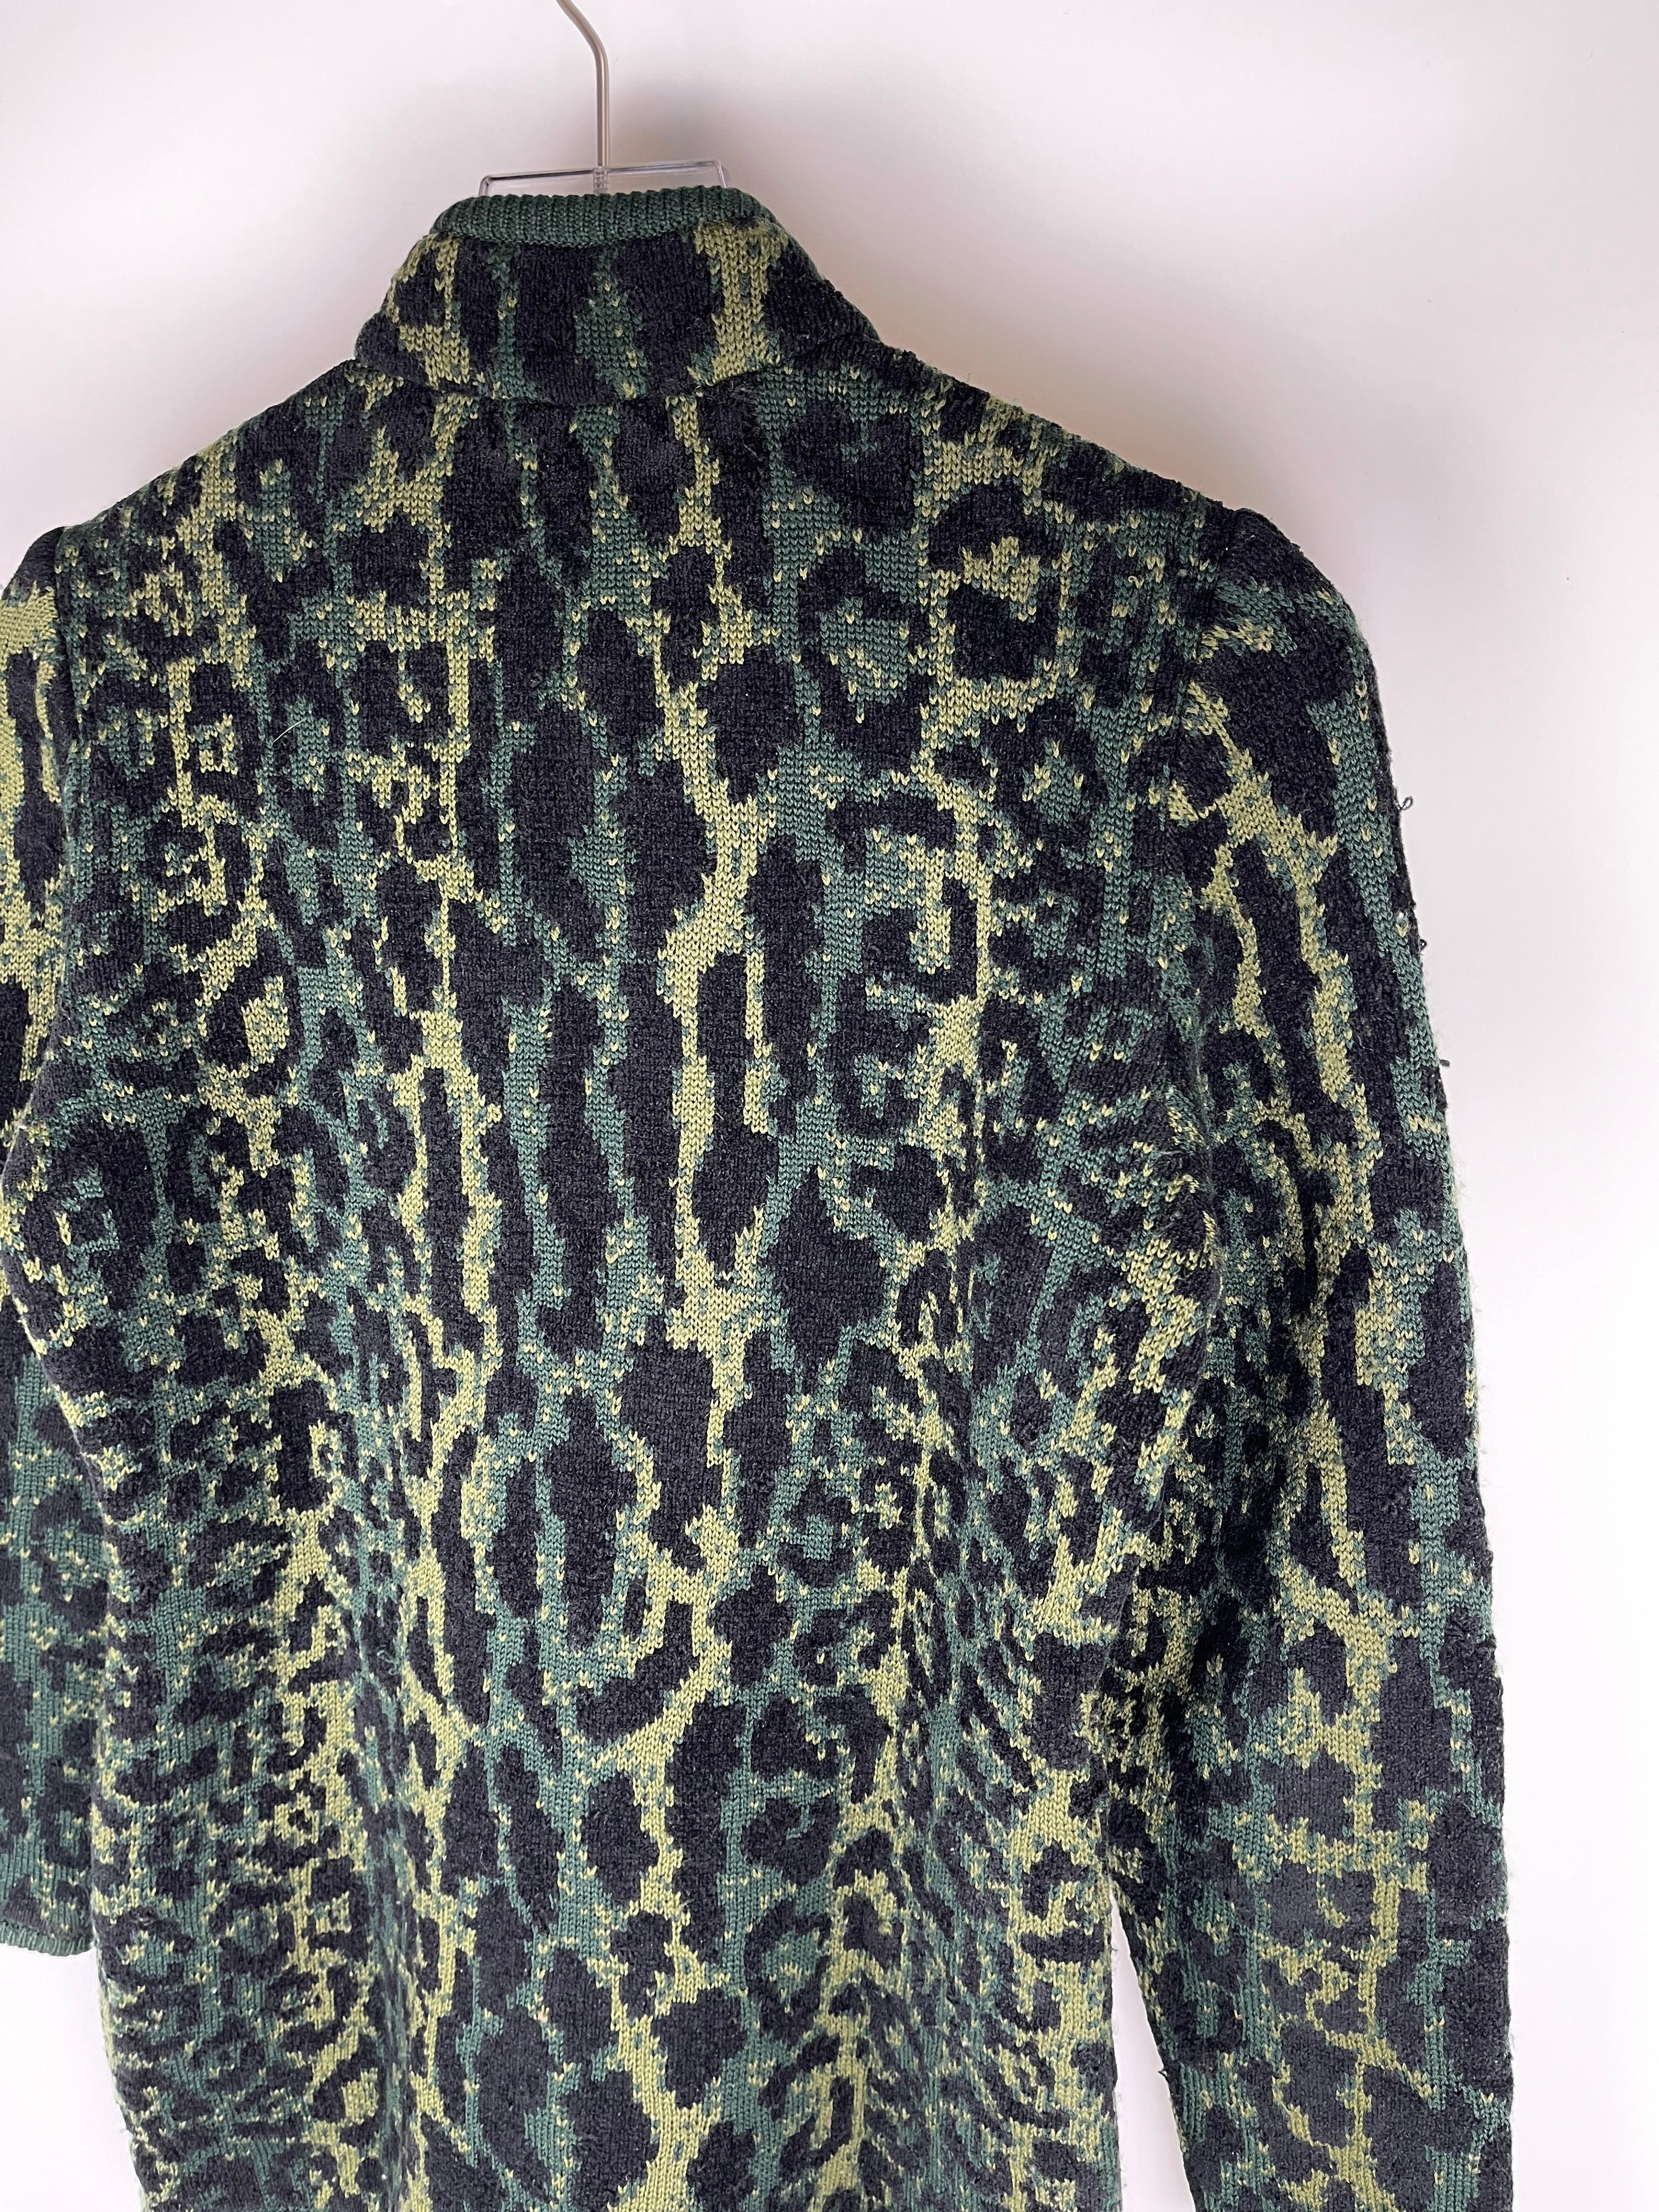 Vintage piece from mainline Yves Saint Laurent.

The piece featured an all-over print of green Snow Leopard, ribbed hem and half zip.

Size: Medium, fits true to size. Also it could fits a Men's Small to XS.

Condition: The piece is in good vintage